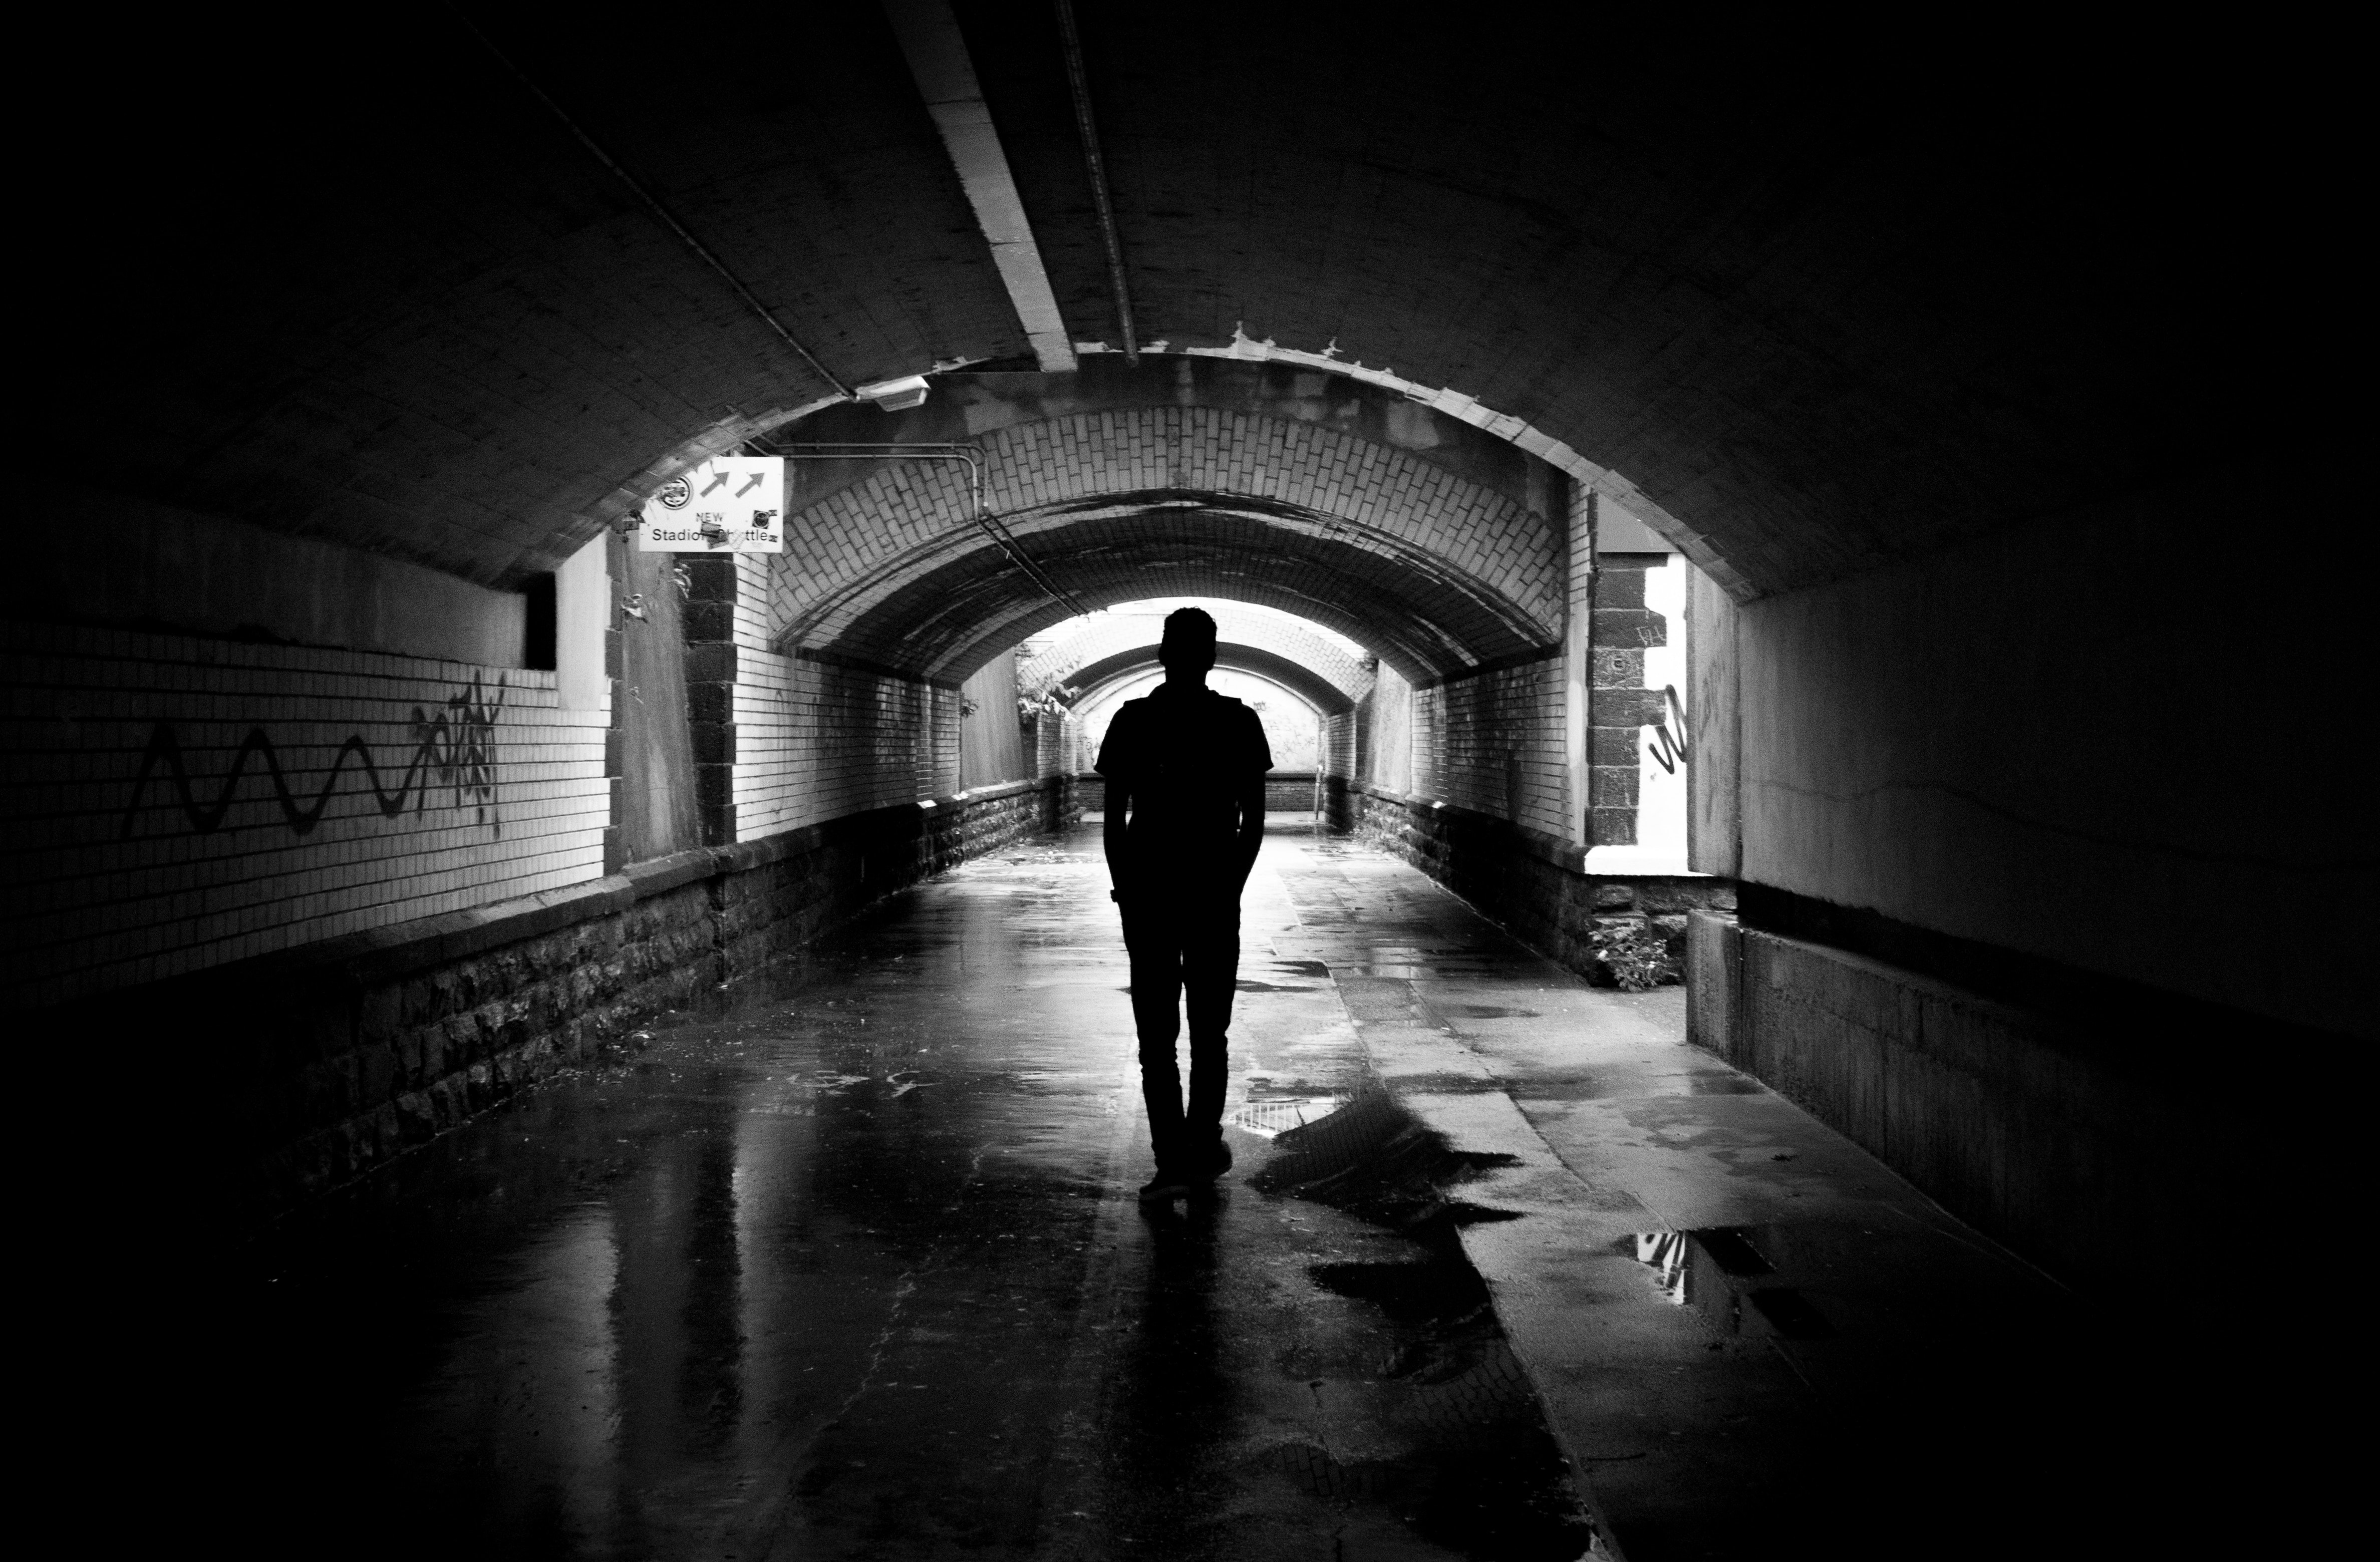 Silhouette photo of a man in a tunnel